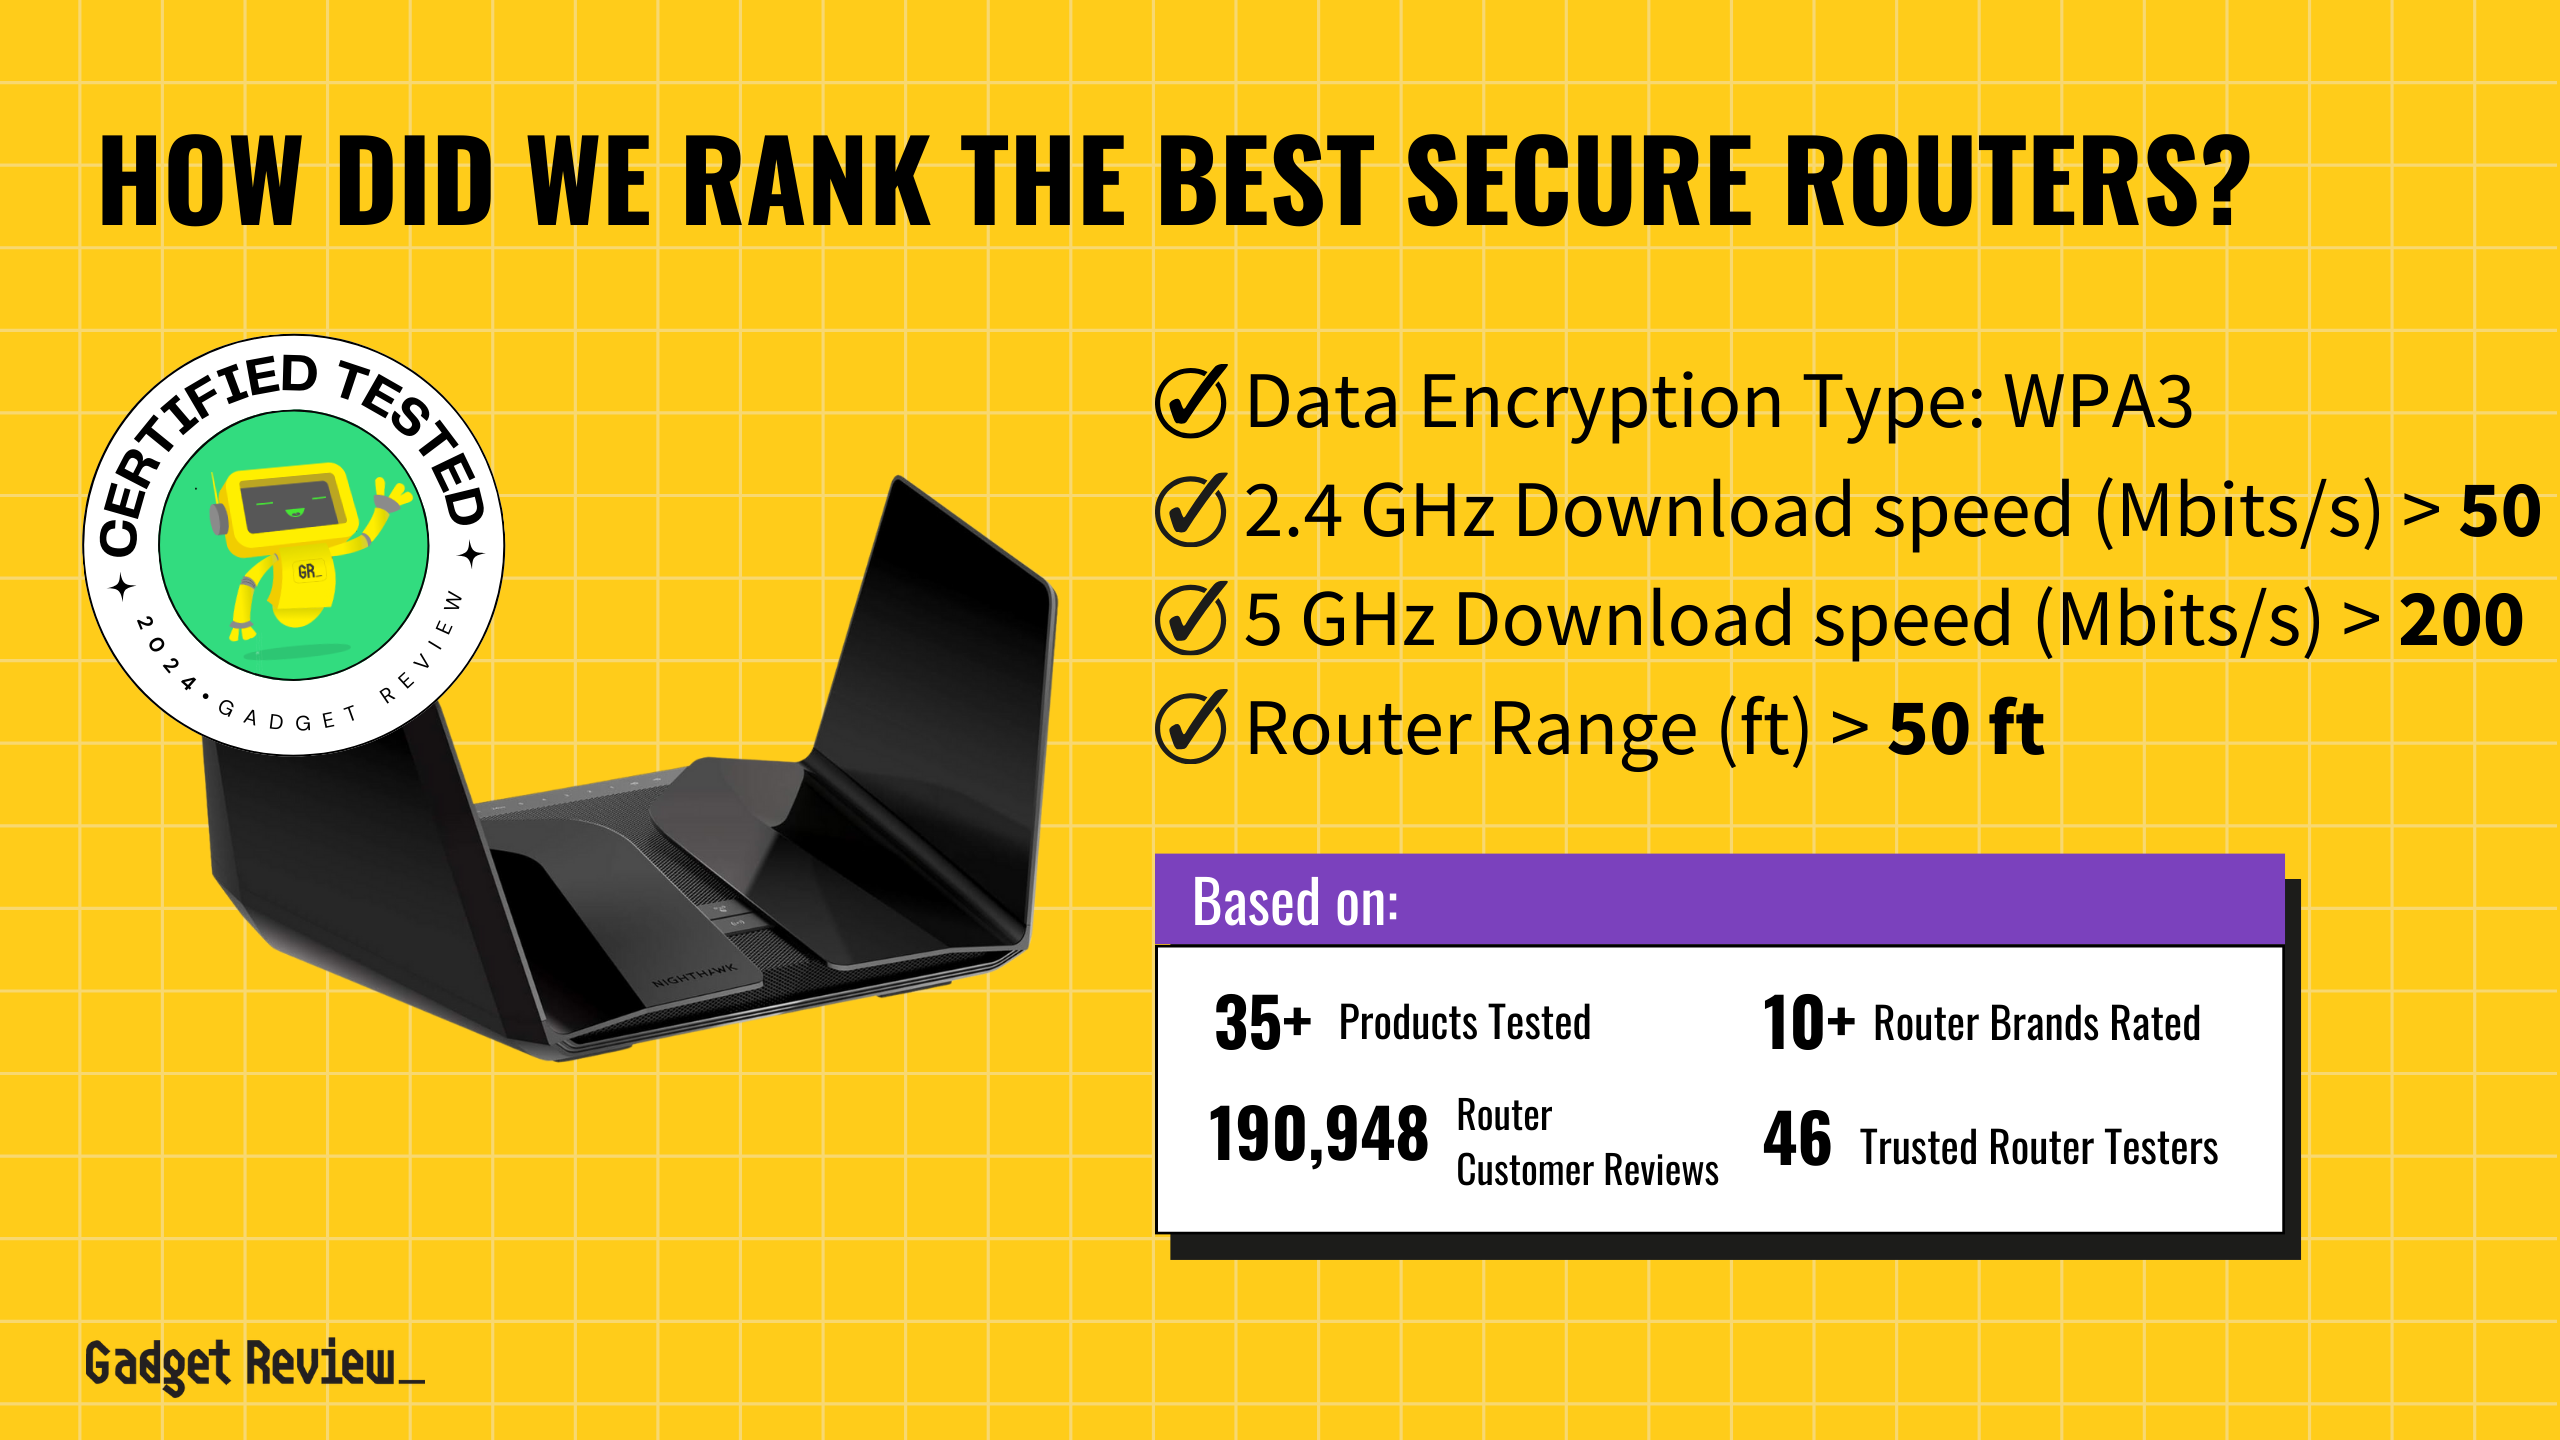 How We Ranked the 5 Best Secure Routers